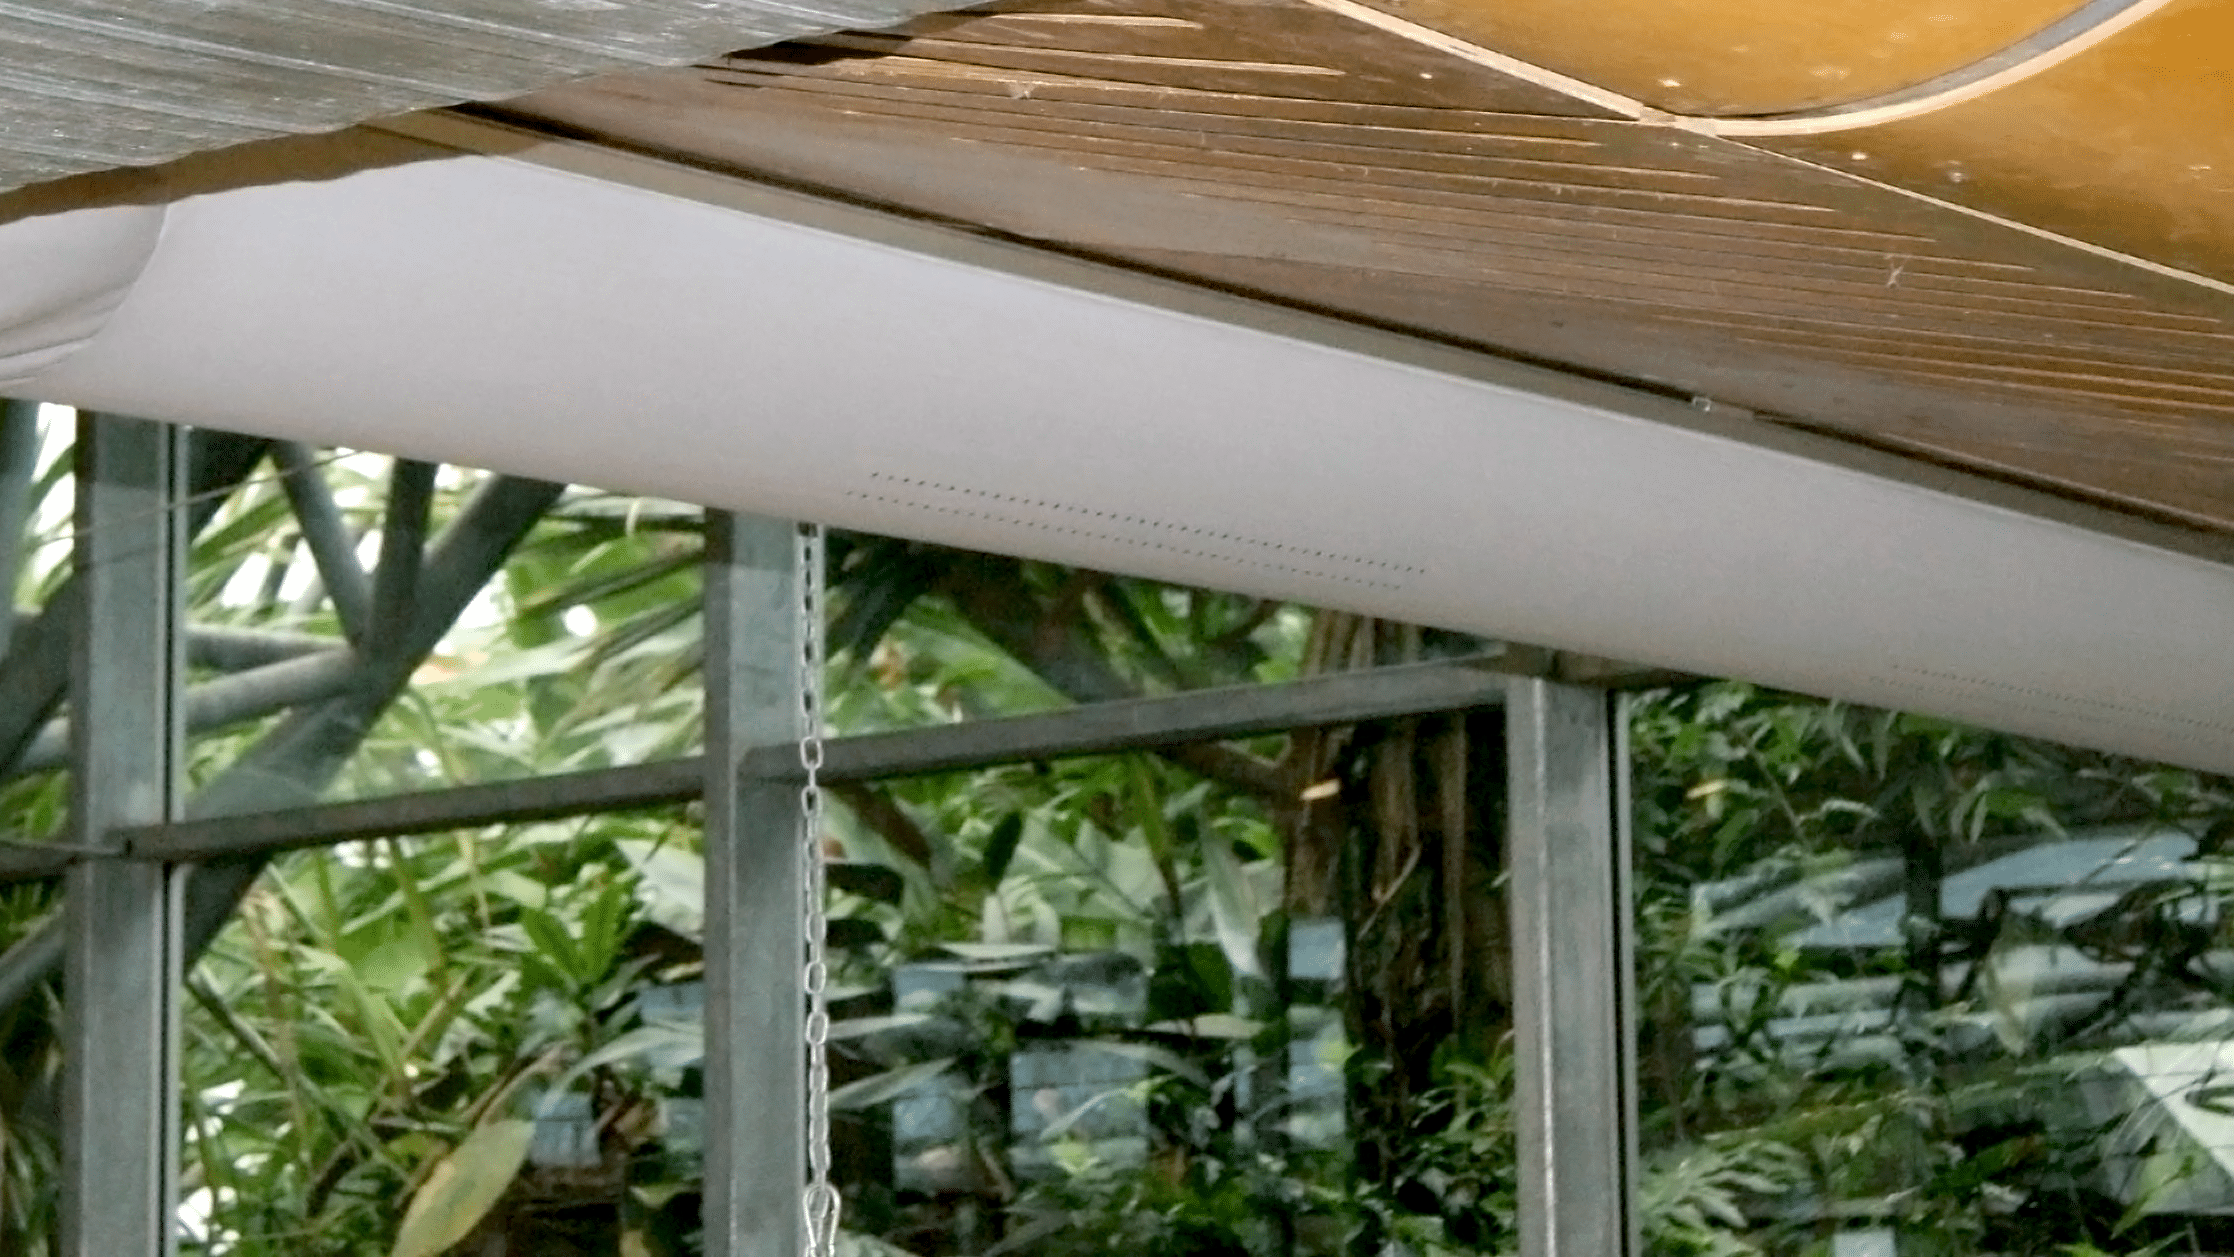 Eden Project eco-friendly fabric ducting